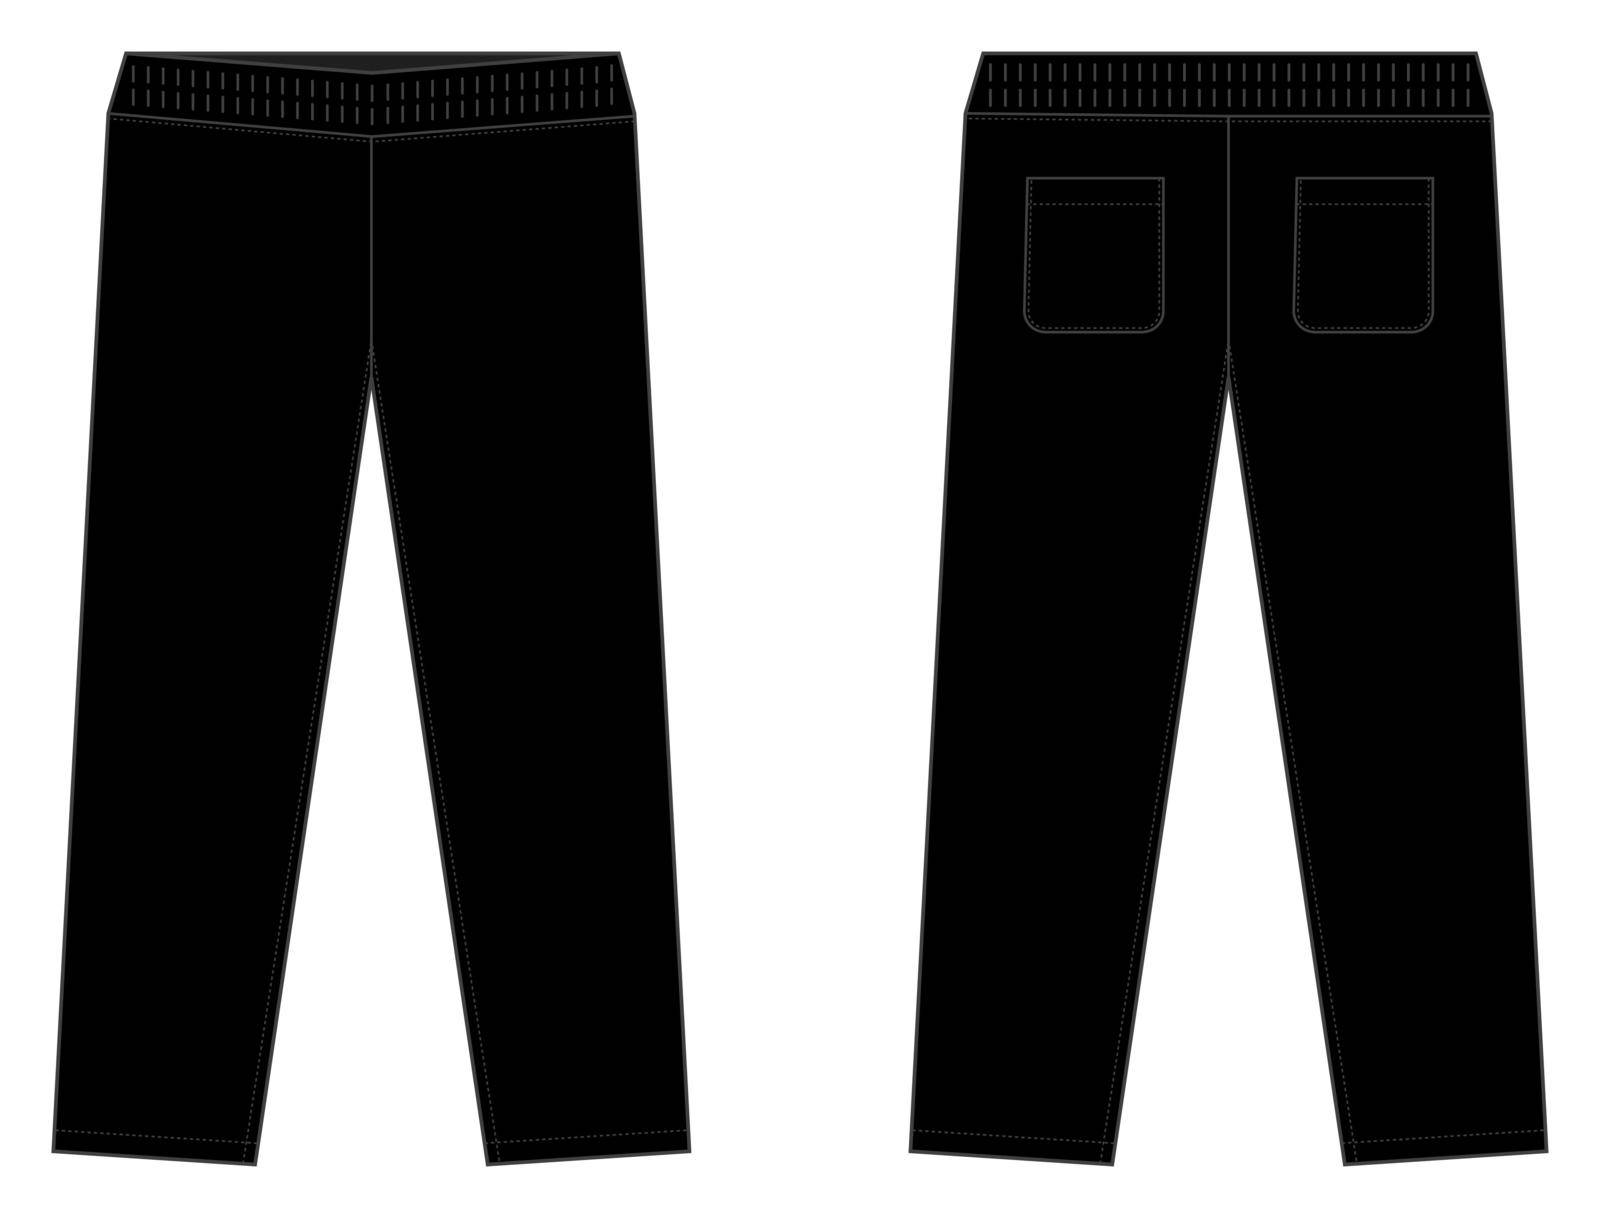 Casual jersey pants / sweat pants template vector illustration / black by barks